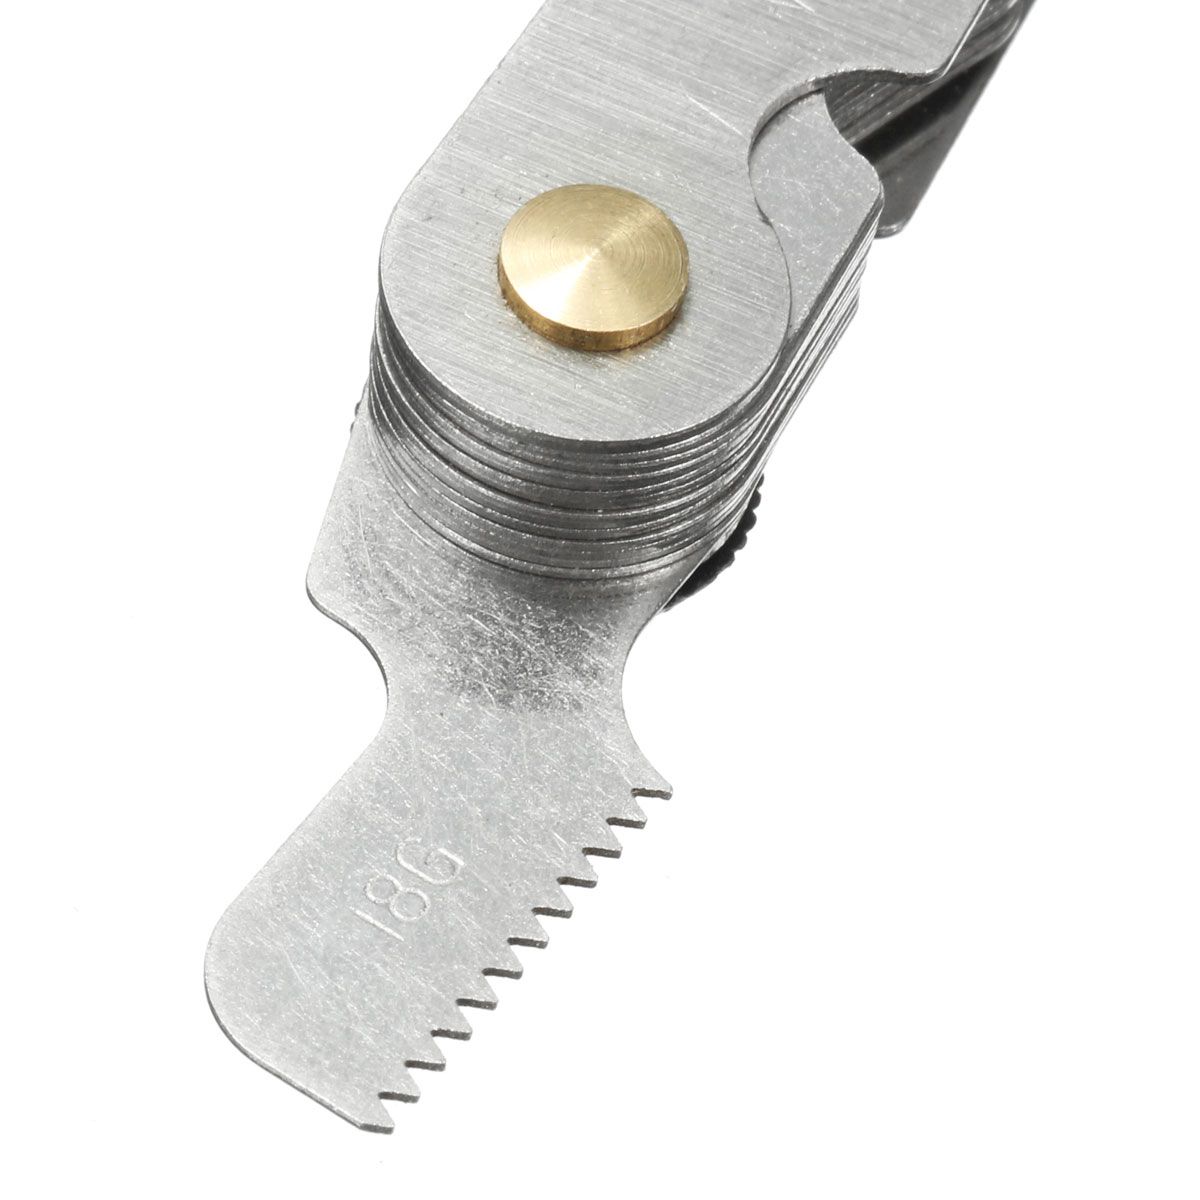 Metric-Whitworth-5560-Degree-Thread-Screw-Pitch-Gauge-With-3x-Centre-Gages-1092555